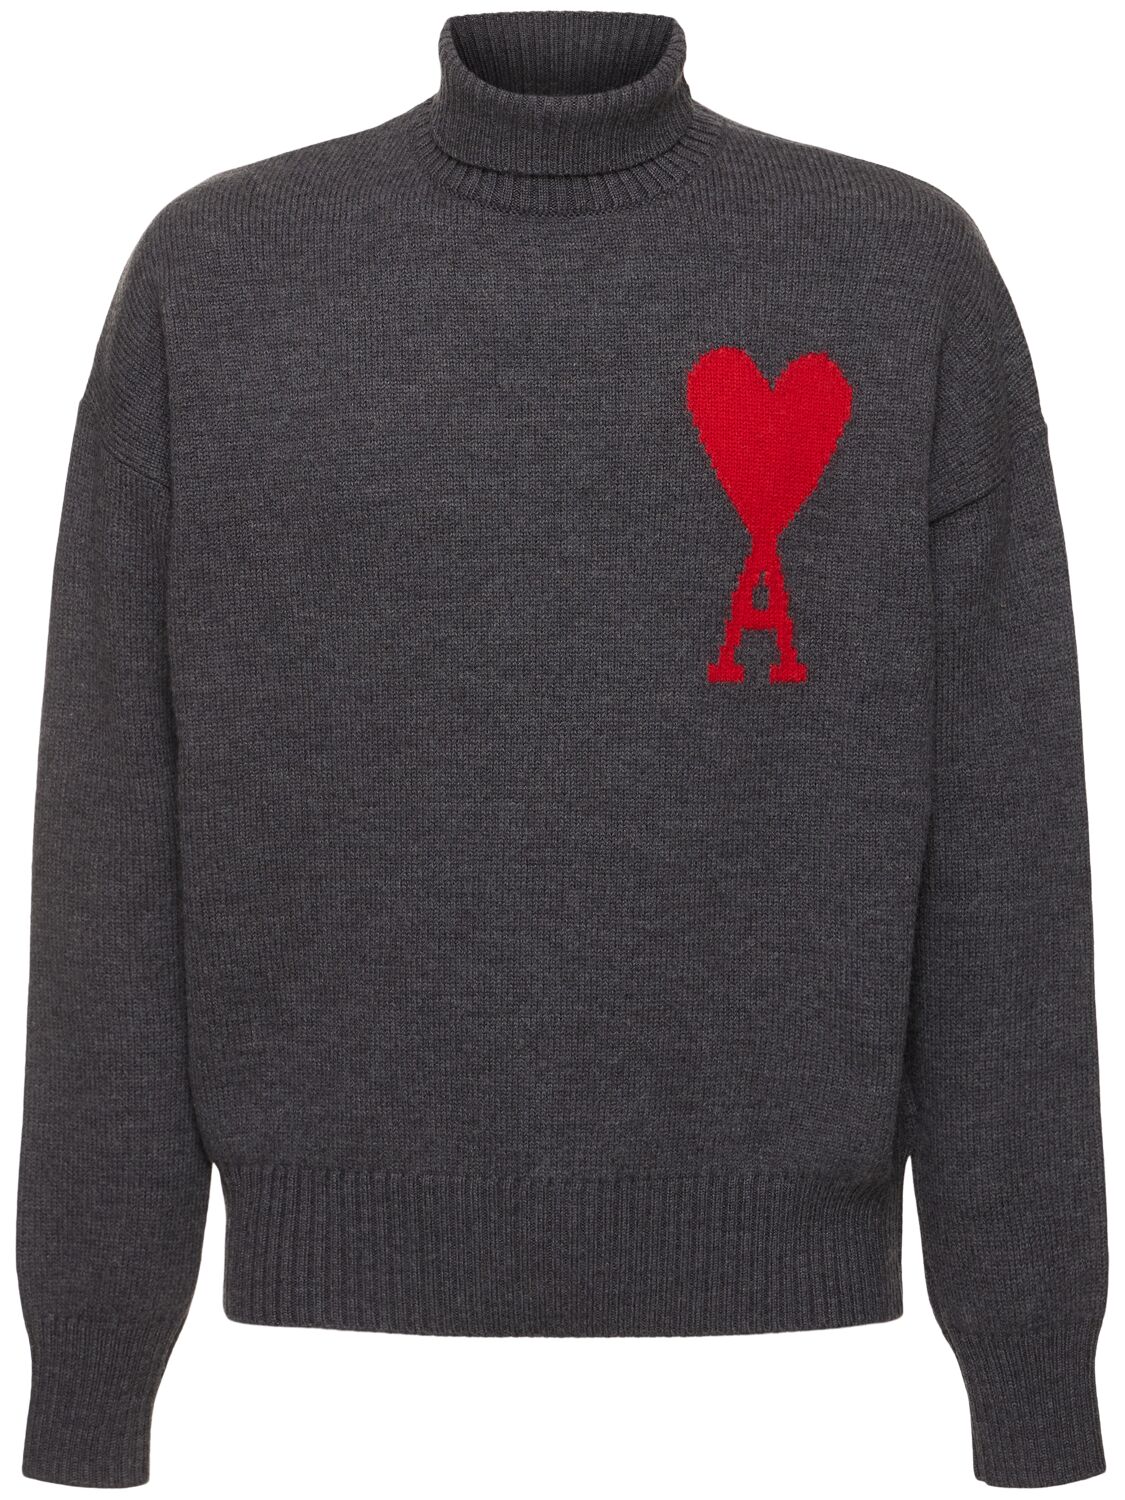 Ami Alexandre Mattiussi Adc Funnel Neck Wool Sweater In Grey/red